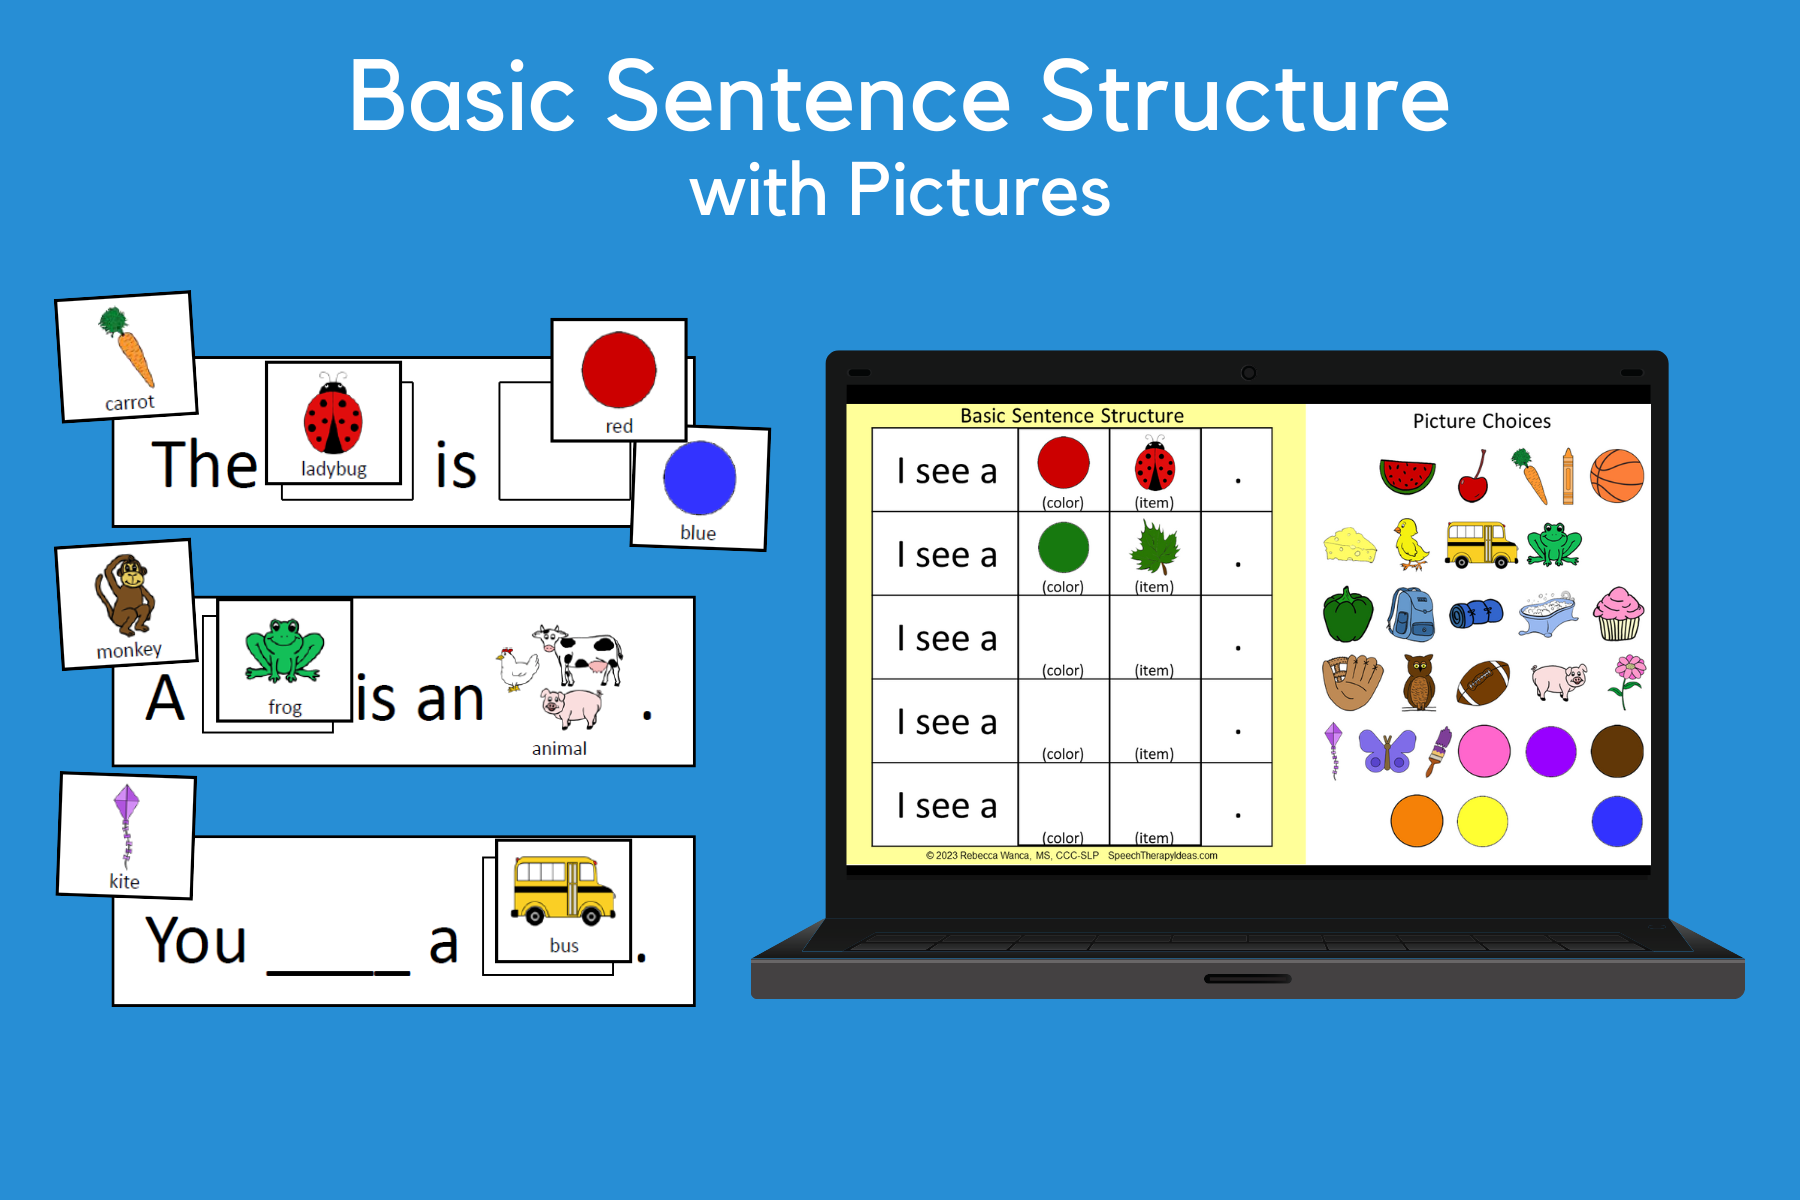 Basic Sentence Structure with Pictures